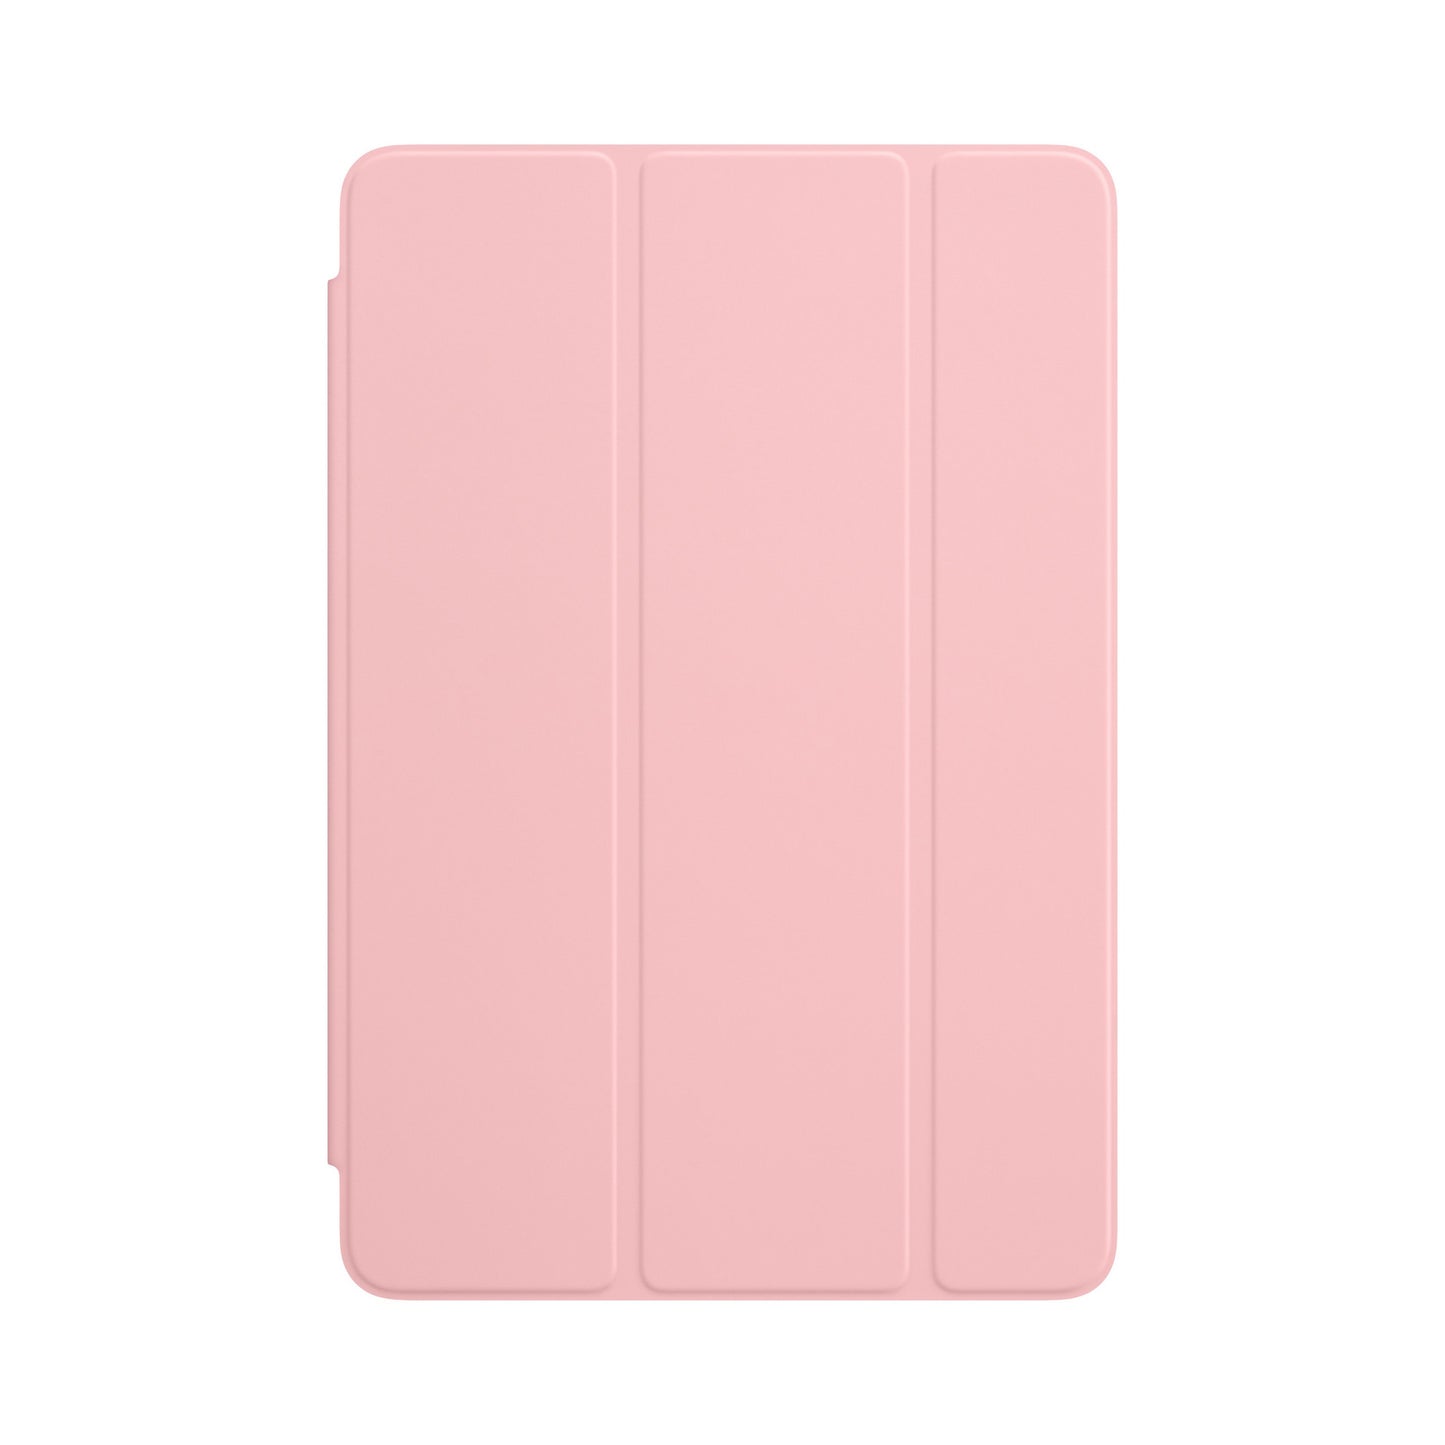 Apple Cover Case (Cover) for iPad mini 4 - Pink